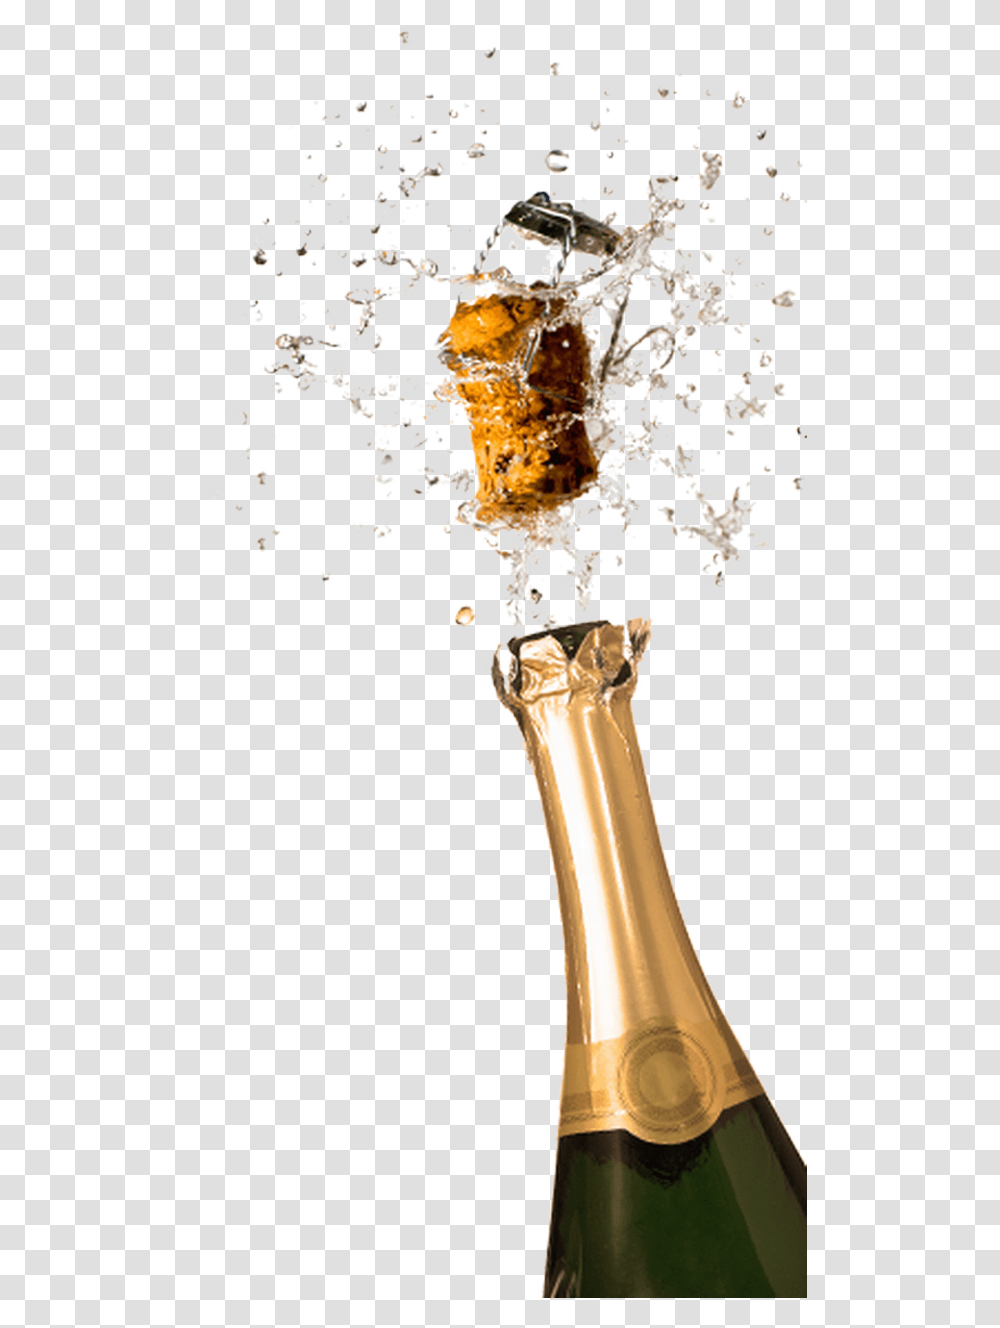 Champagne Glass Bottle Champagne Bottle Background, Poster, Advertisement, Food, Collage Transparent Png